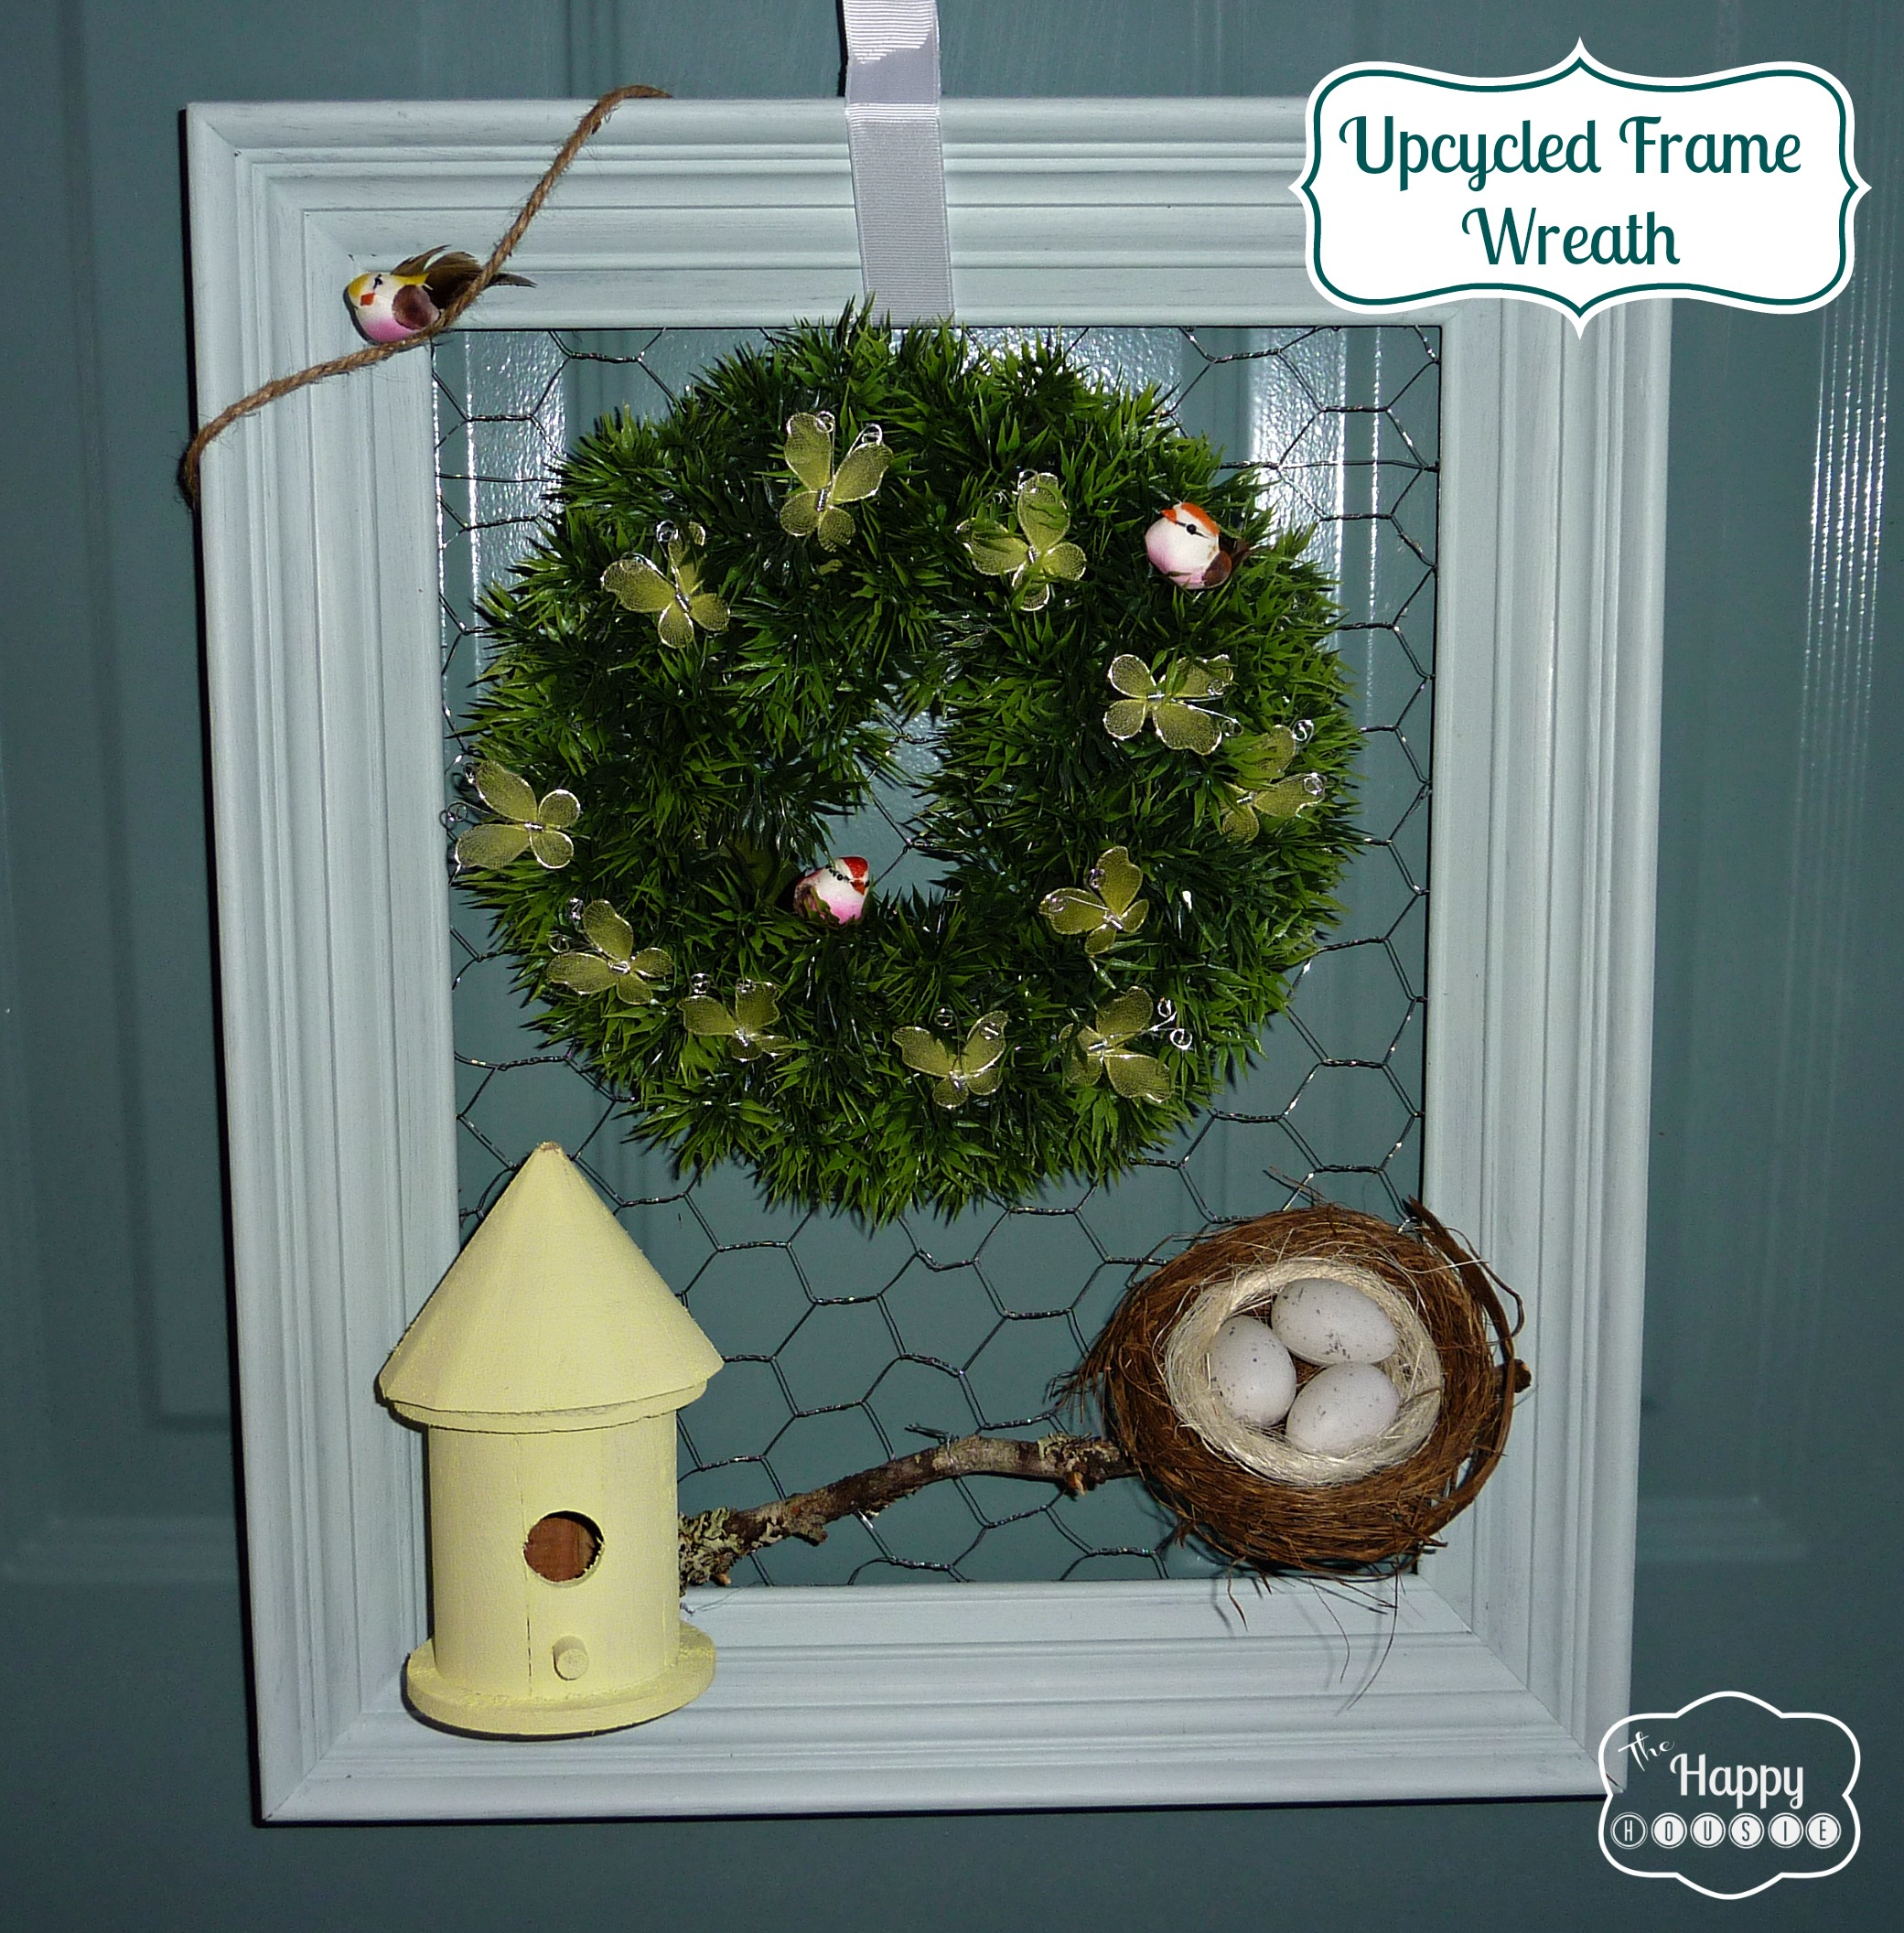 4F Craftin’: Upcycled Vintage Frame Wreath for Spring